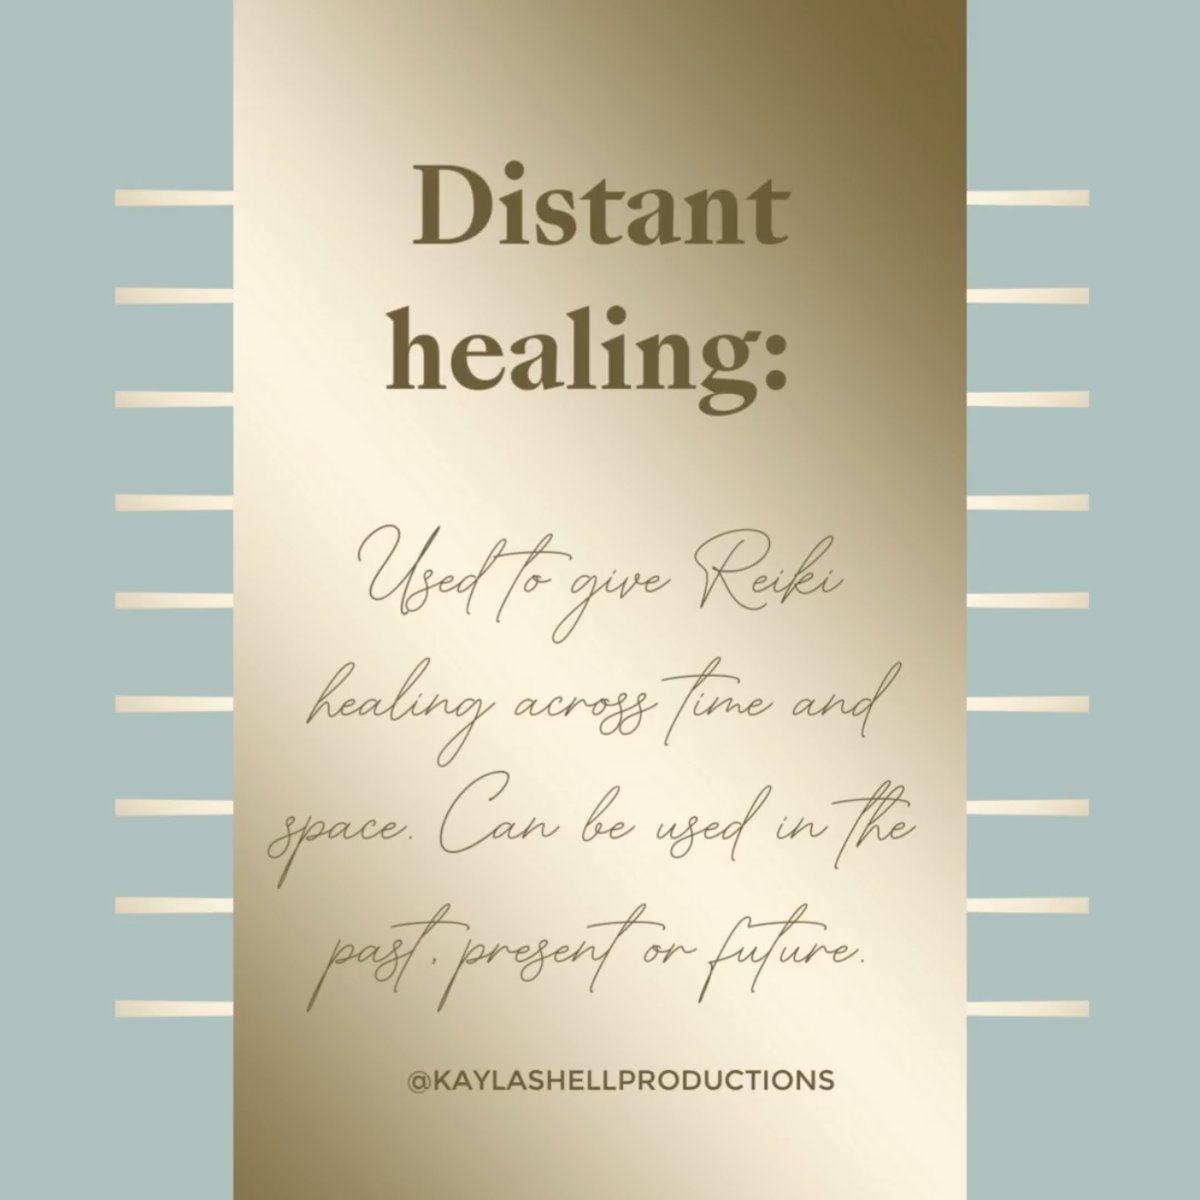 Distant healing in Reiki knows no boundaries, as energy flows wherever it is needed, transcending time and space. Trust in the power of this ancient practice to connect, heal and harmonize from afar

#ReikiMaster #EnergyHealing #RichSpirit #Reiki #DistantHealing #EnergyFlow